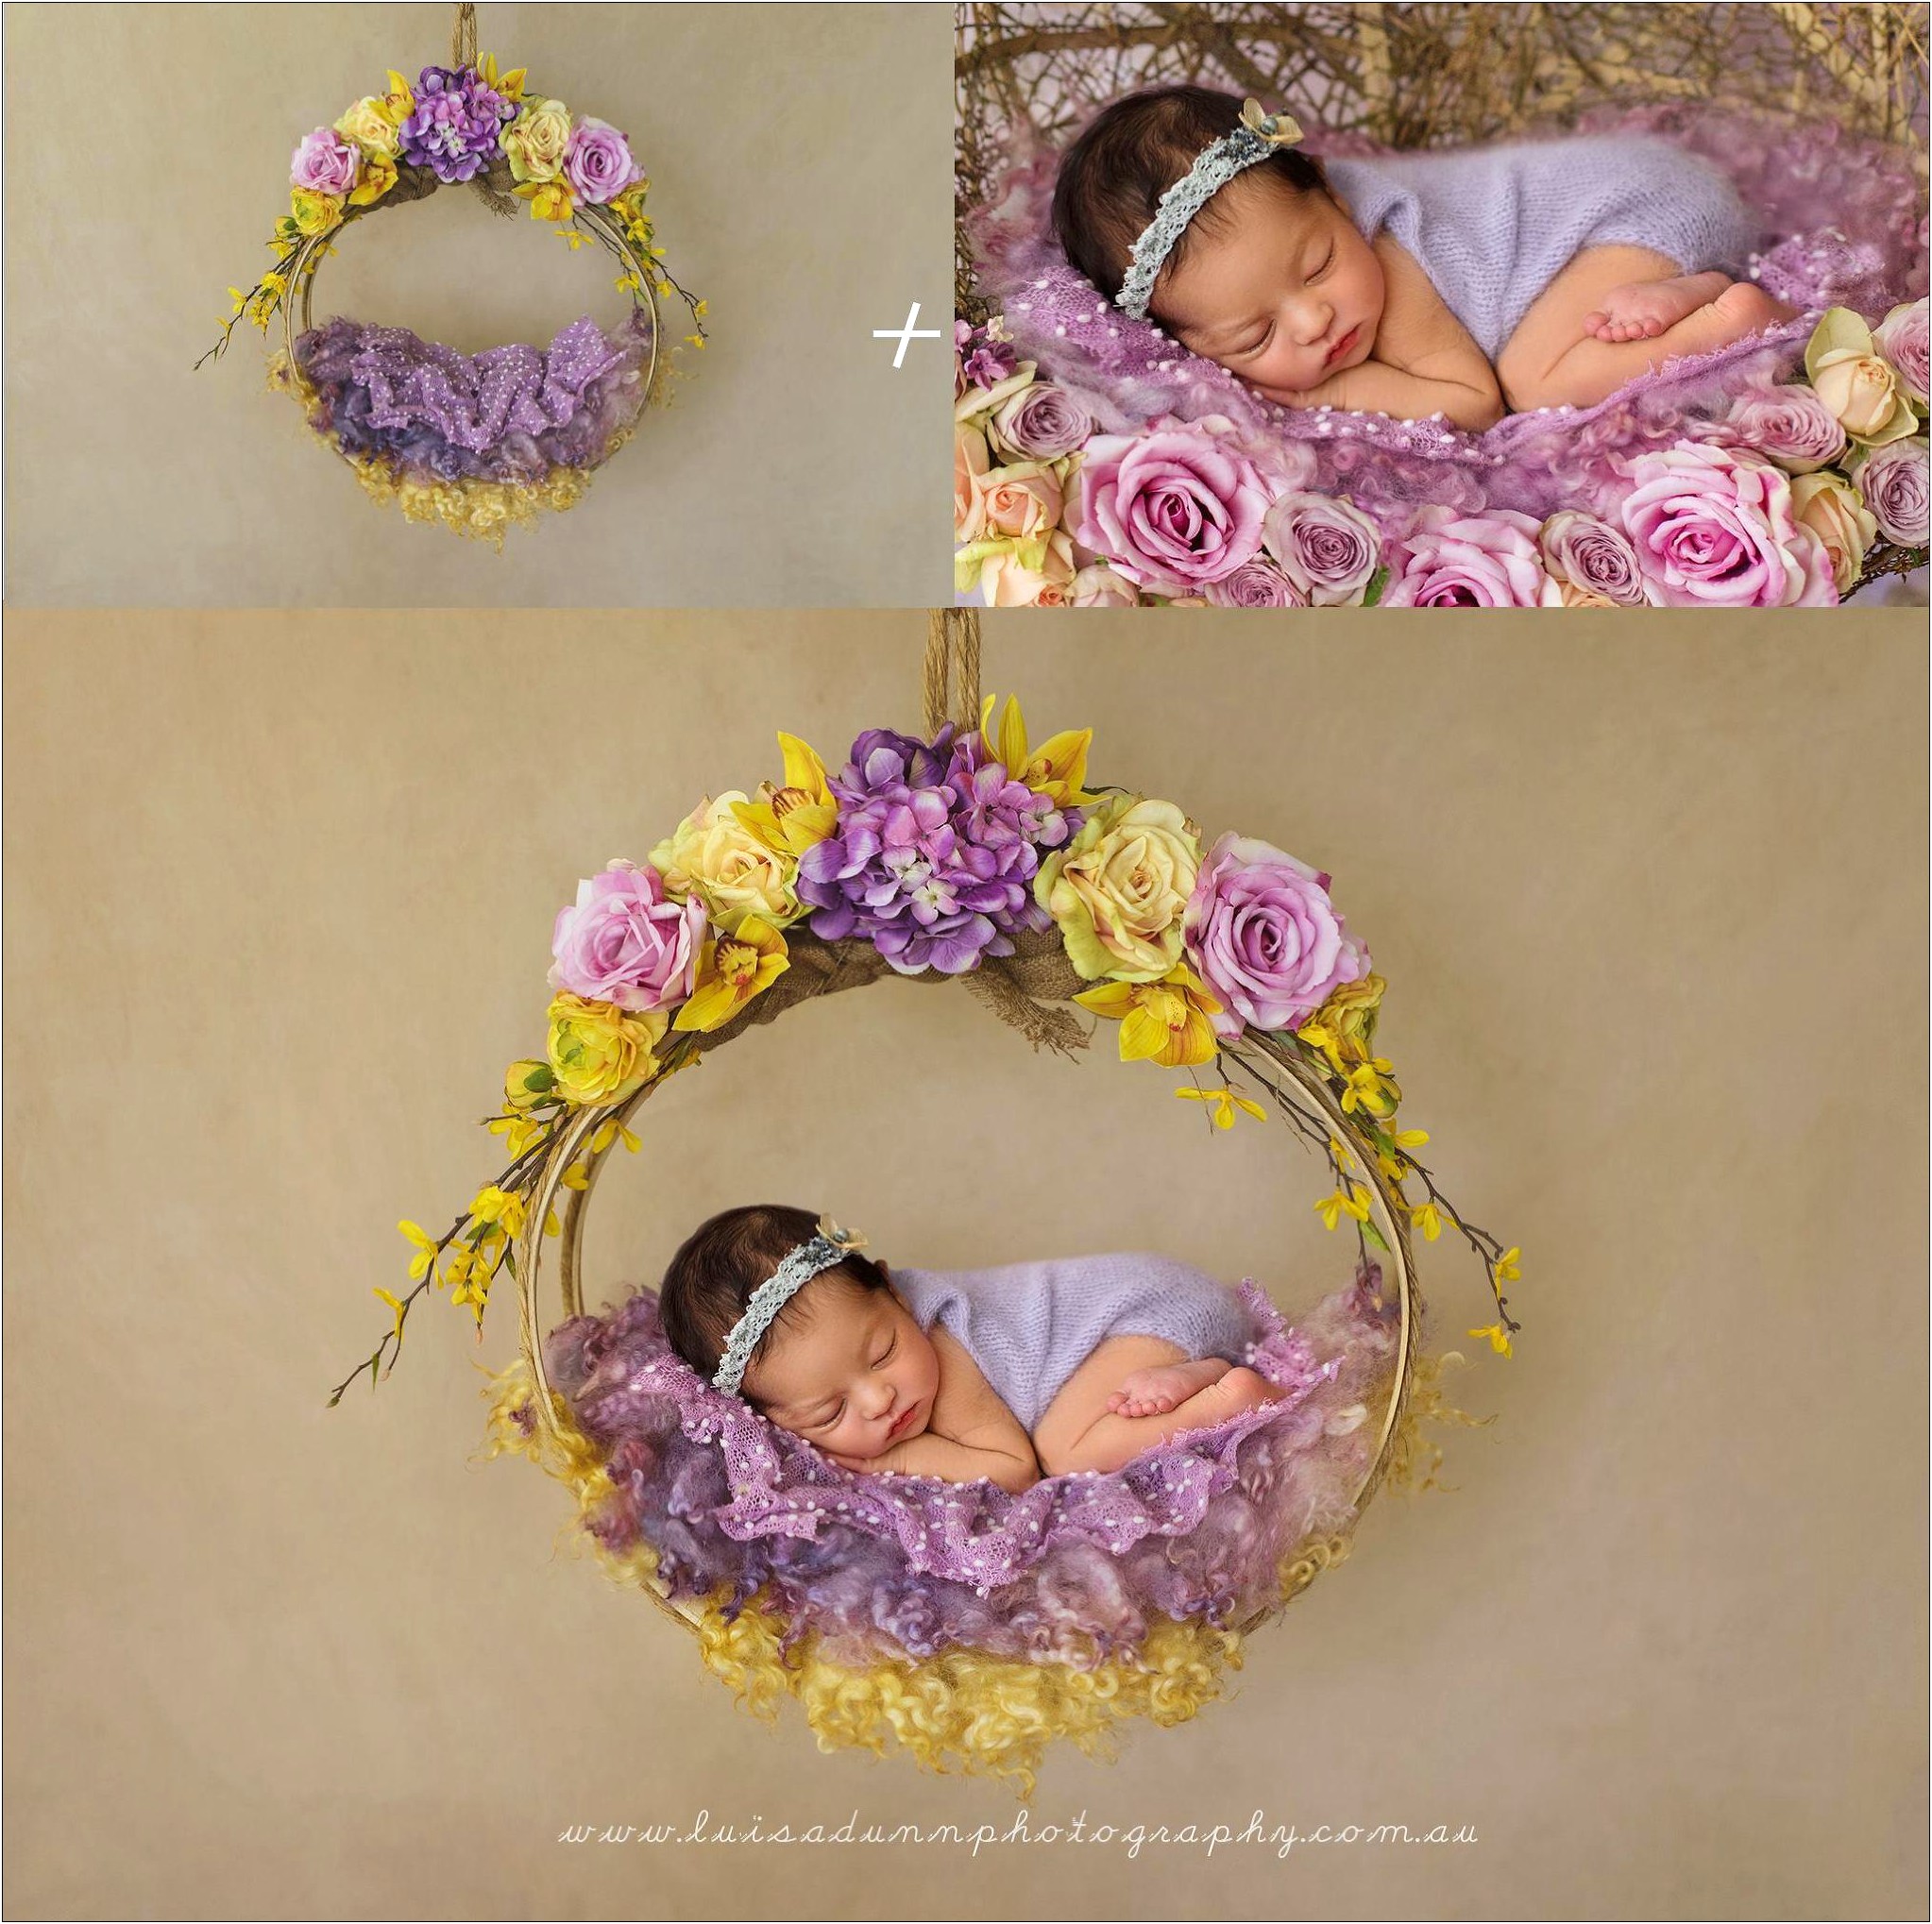 Free Photoshop Templates For Newborn Photography